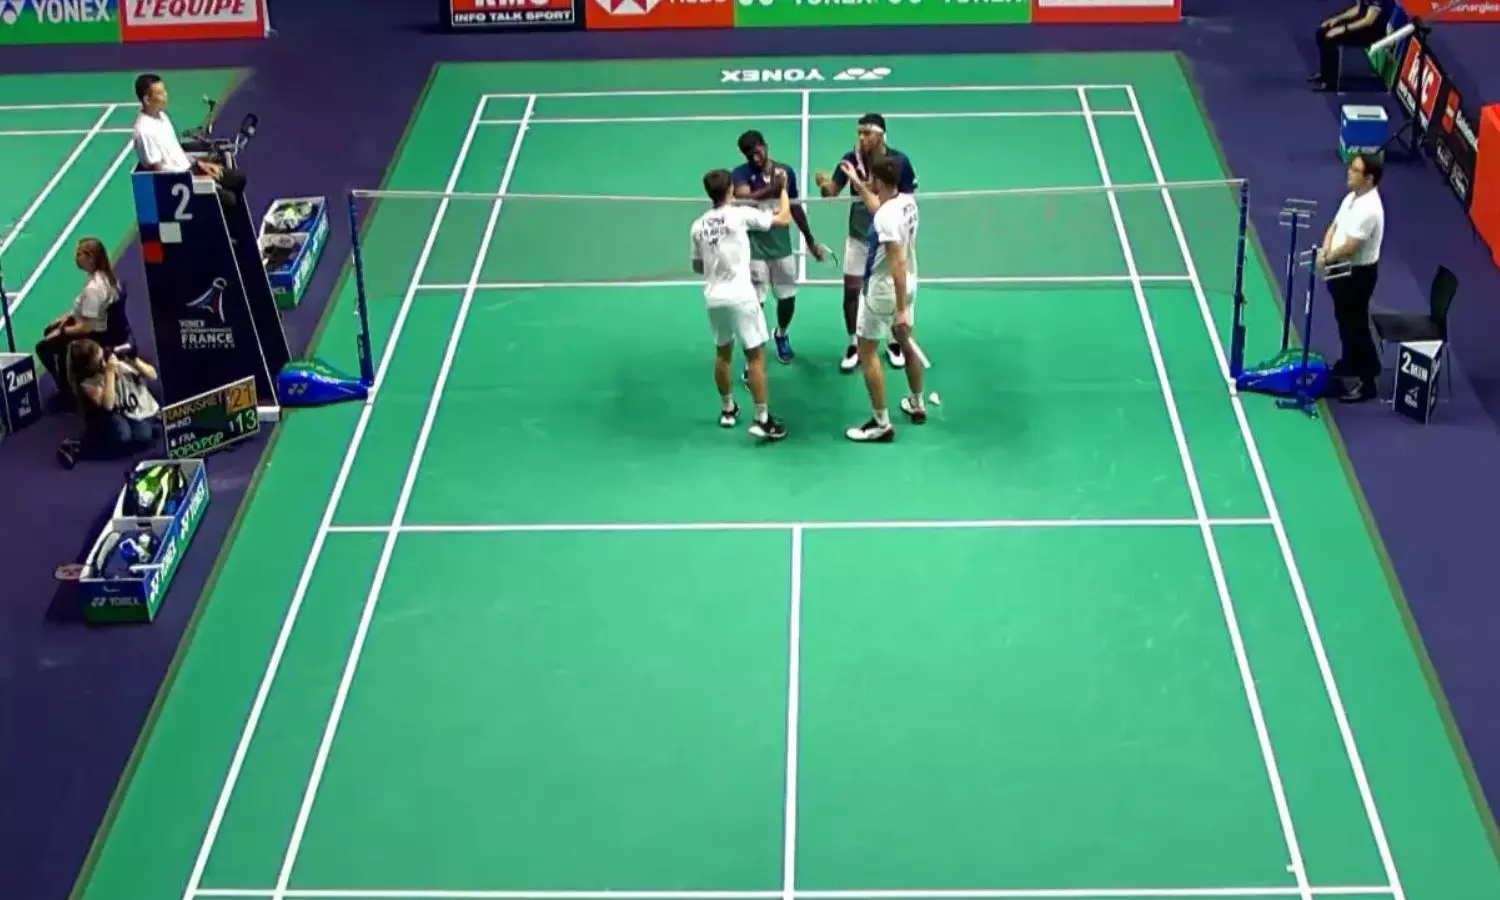 live badminton french open 2022